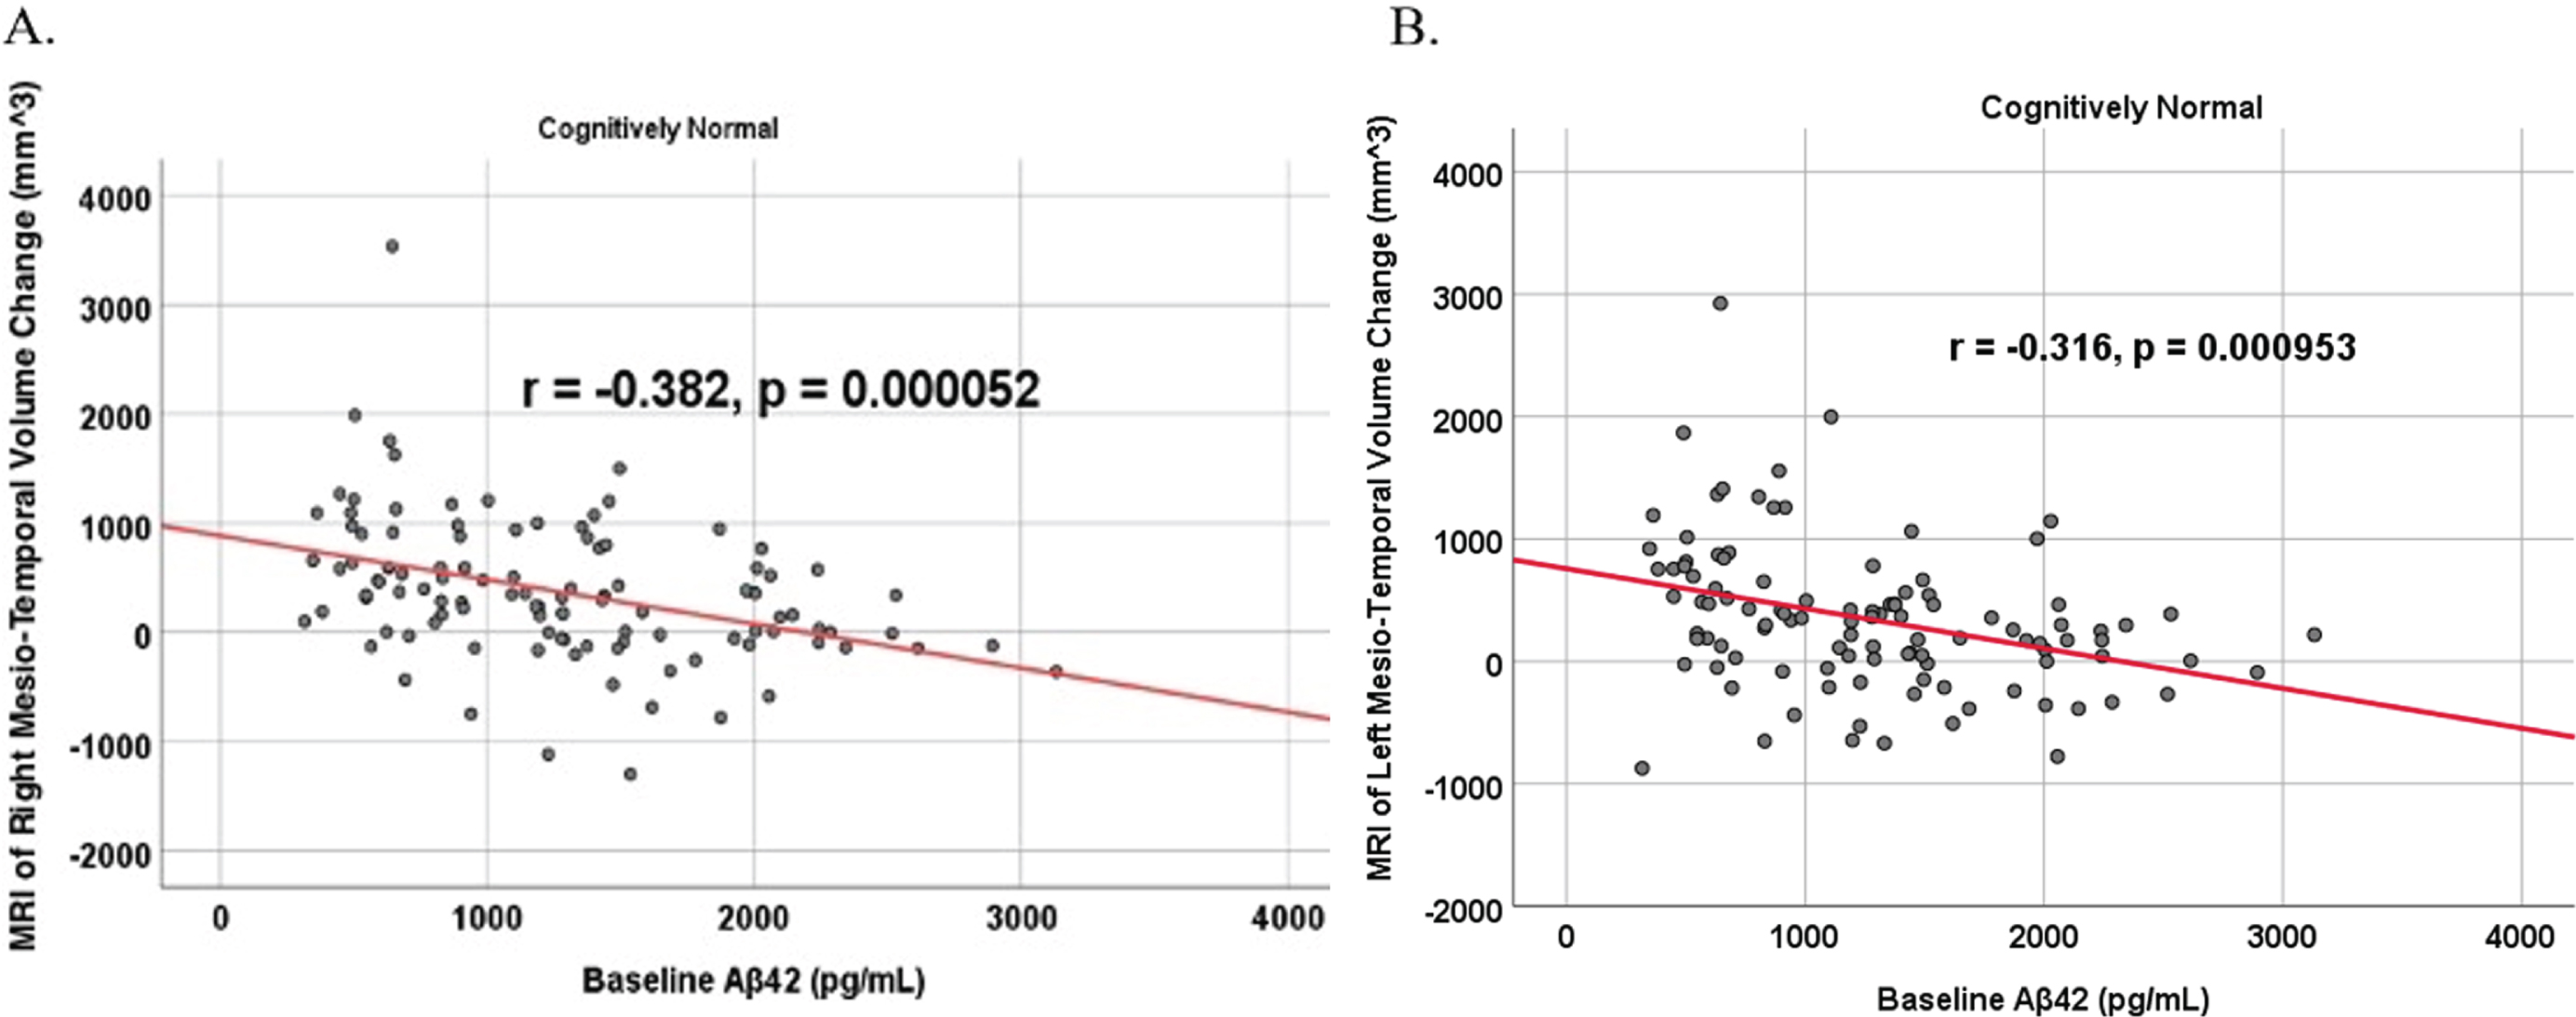 Partial correlations between baseline Aβ42 and MRI brain regional volume change in cognitively unimpaired control participants, corrected for age and education. Scatterplots above are corrected for age and education. A) Aβ42 versus Right Mesio-Temporal (r = –0.382, p = 0.000052). B) Aβ42 versus Left Mesio-Temporal (r = –0.316, p = 0.000953).